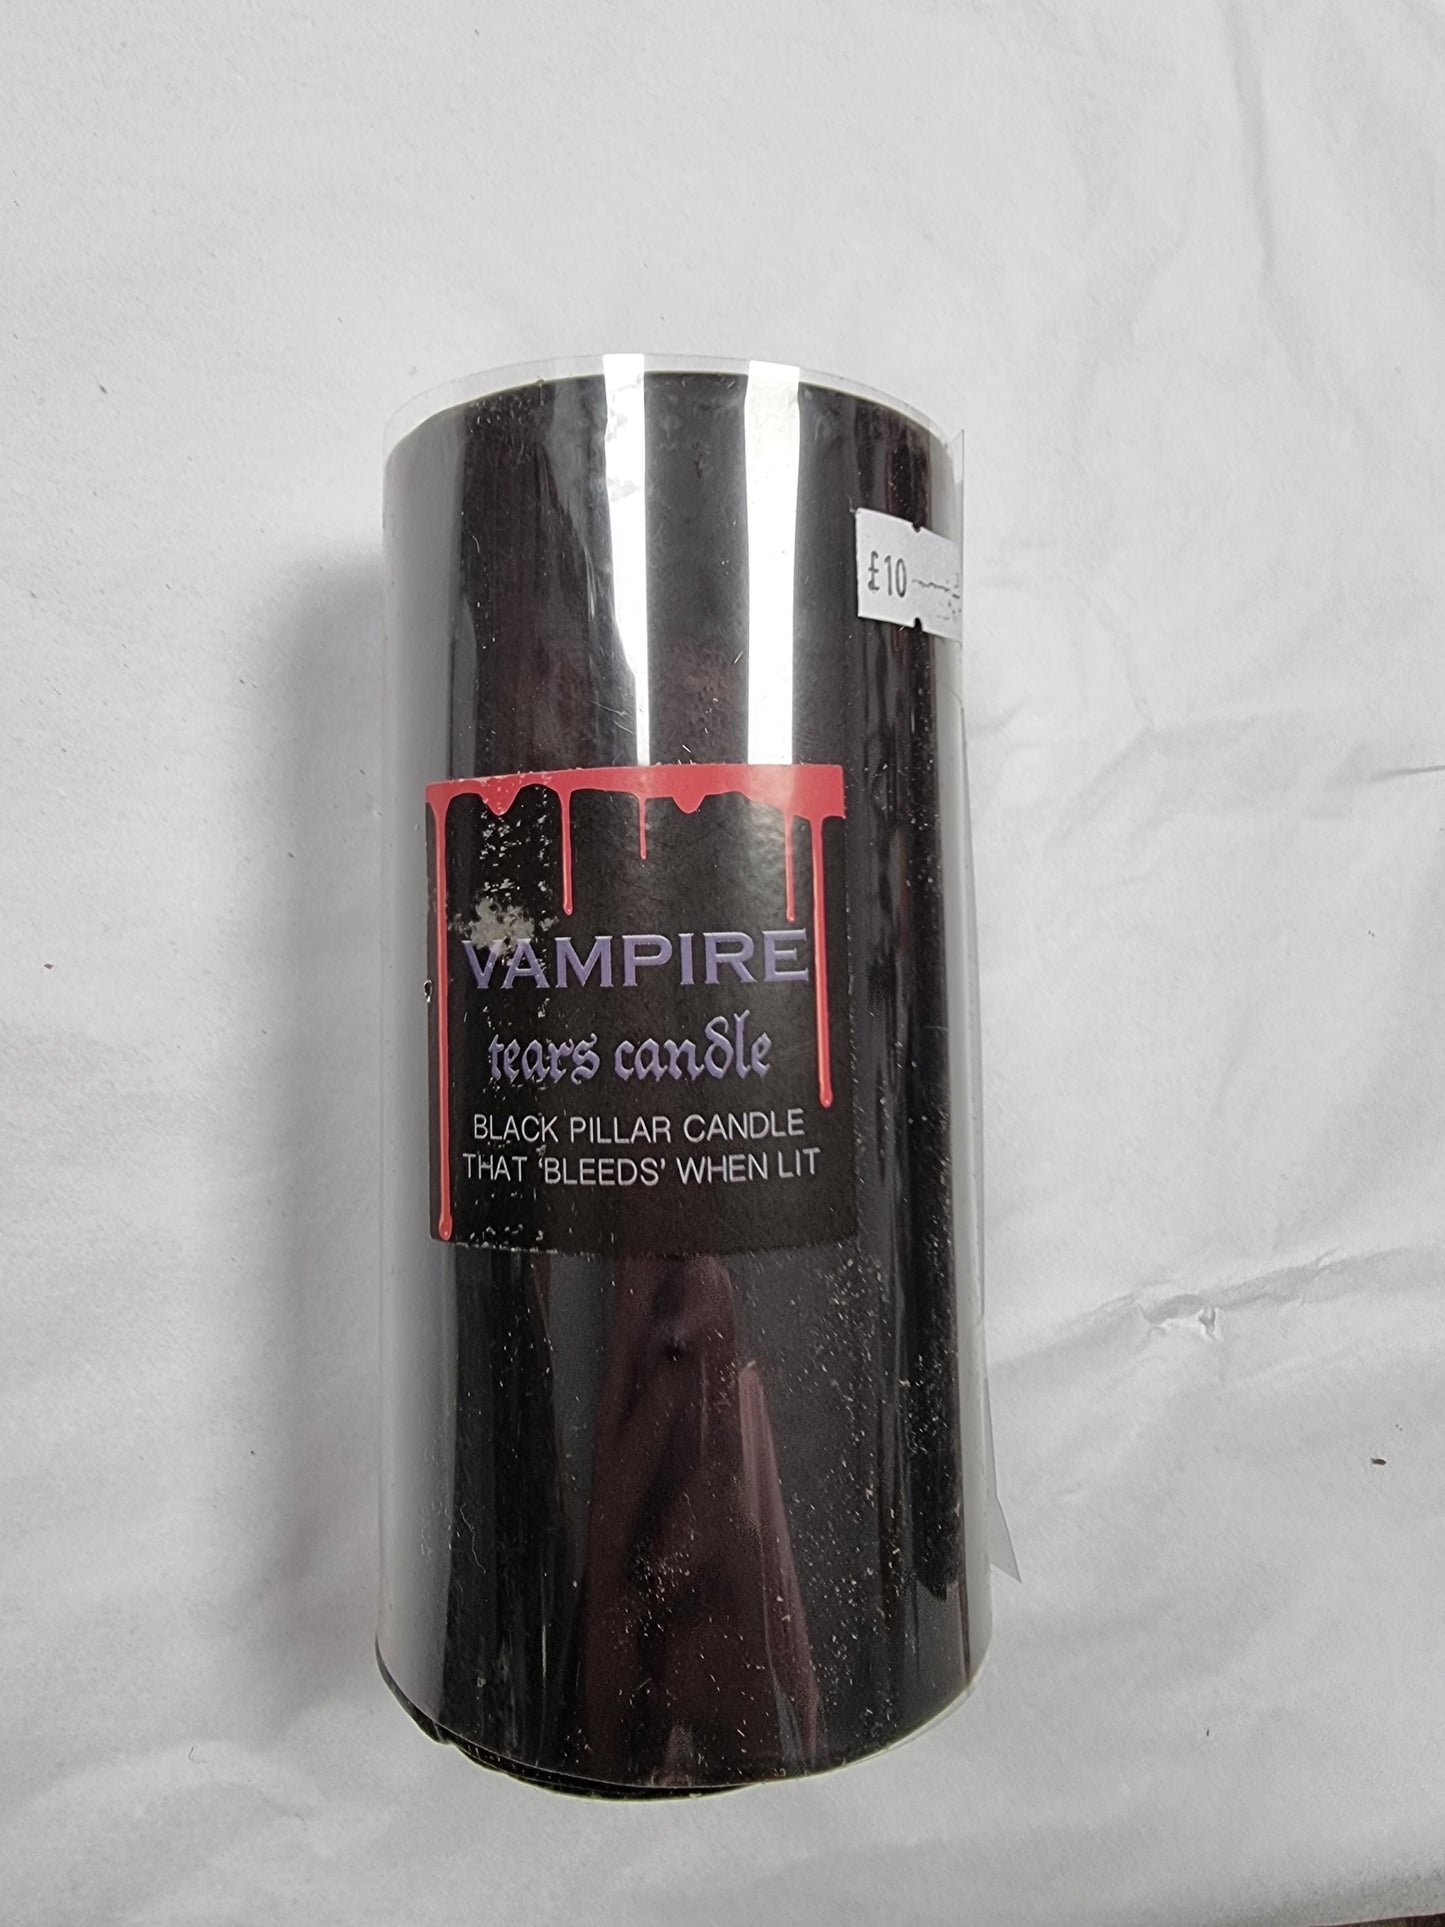 Vampire candle